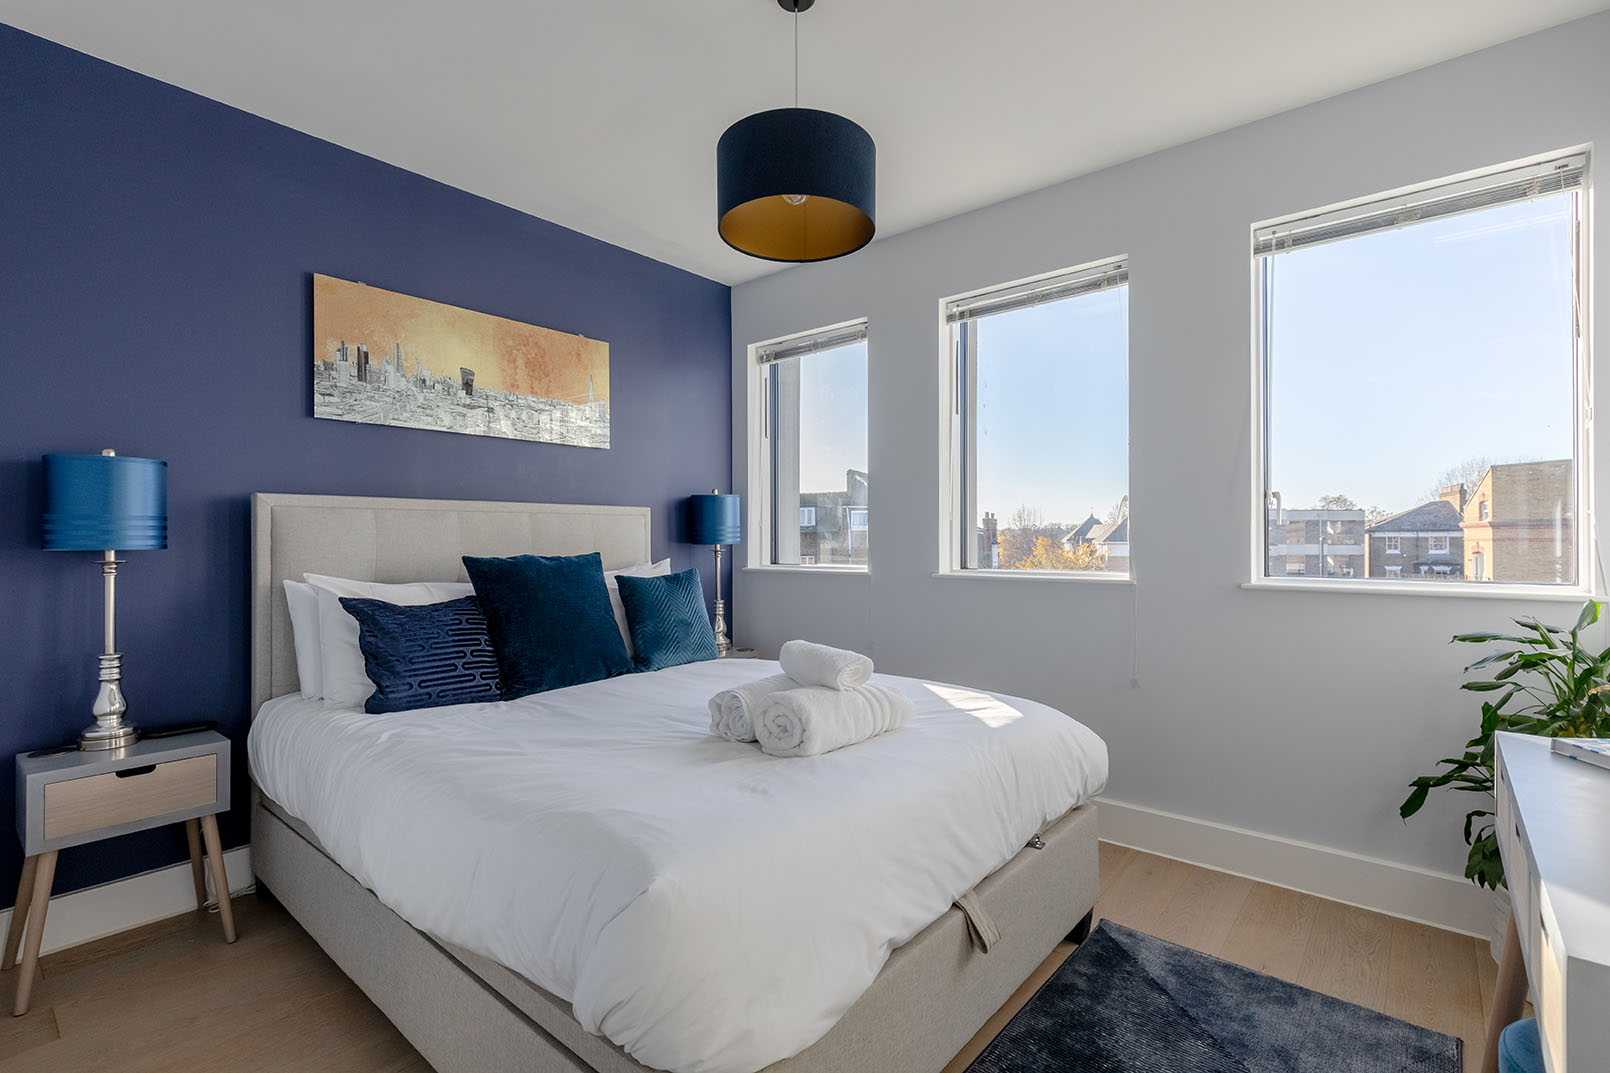 A regular size bedroom with a dark navy accent colour wall, 3 windows, a king size bed with white linens and accent colour decorative cushions.